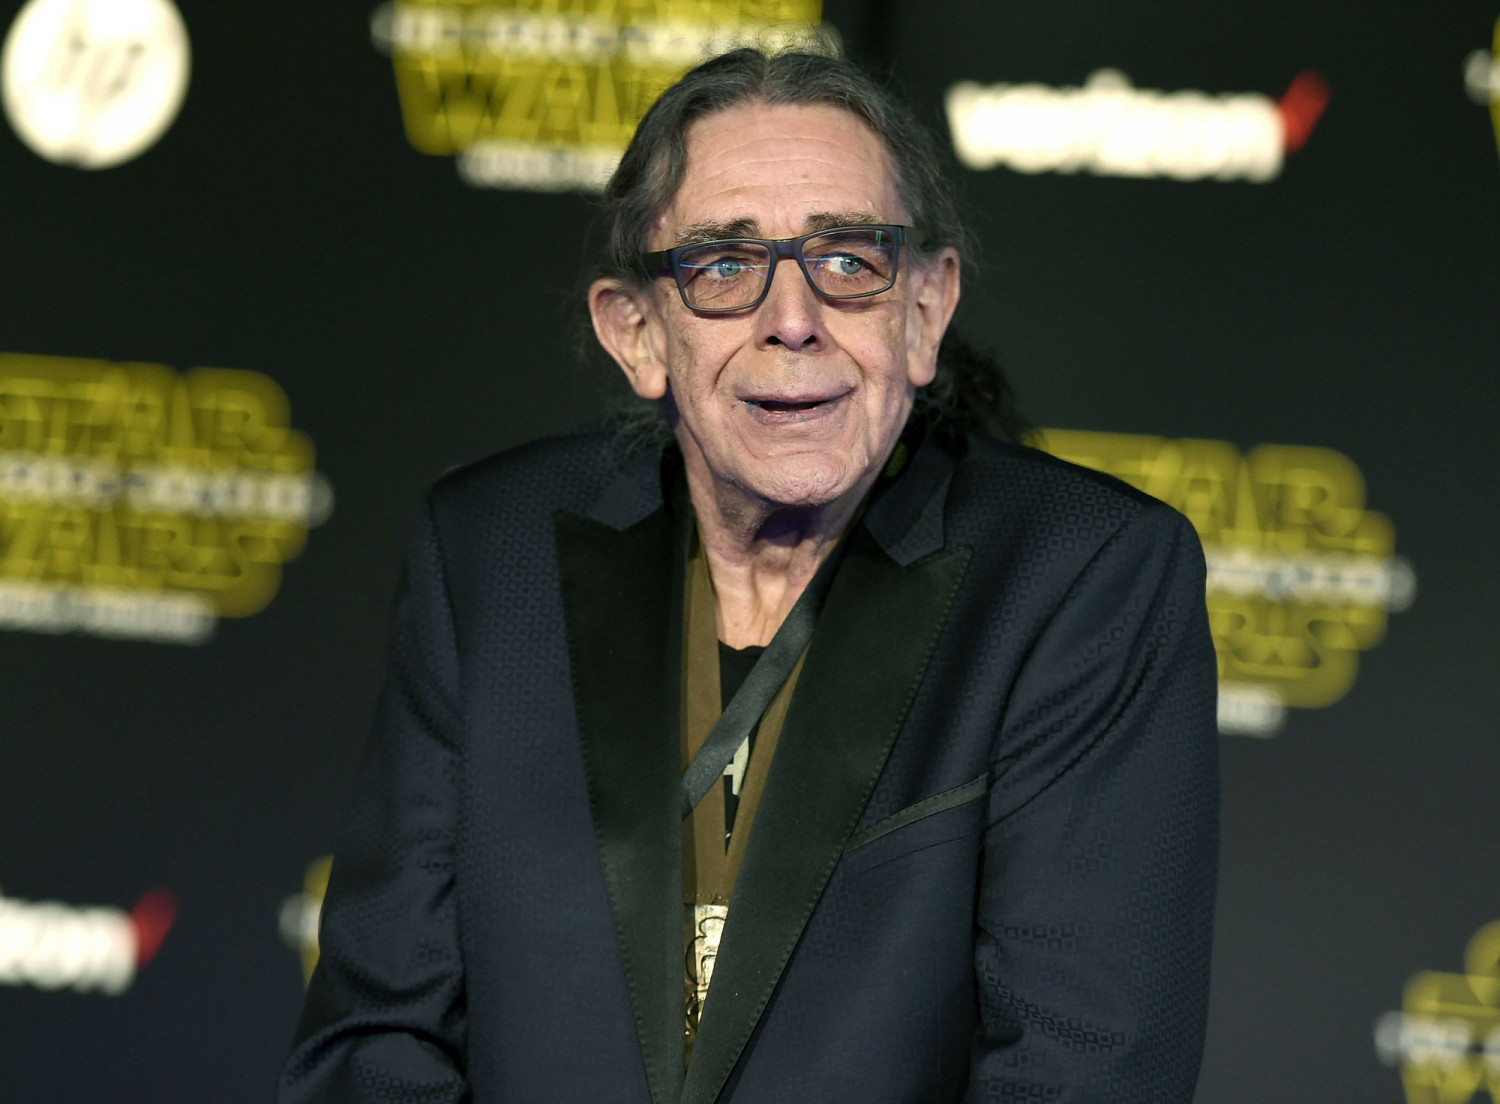 Peter Mayhew, Actor Who Played Chewbacca in ‘Star Wars’ Movies, Dies at 74